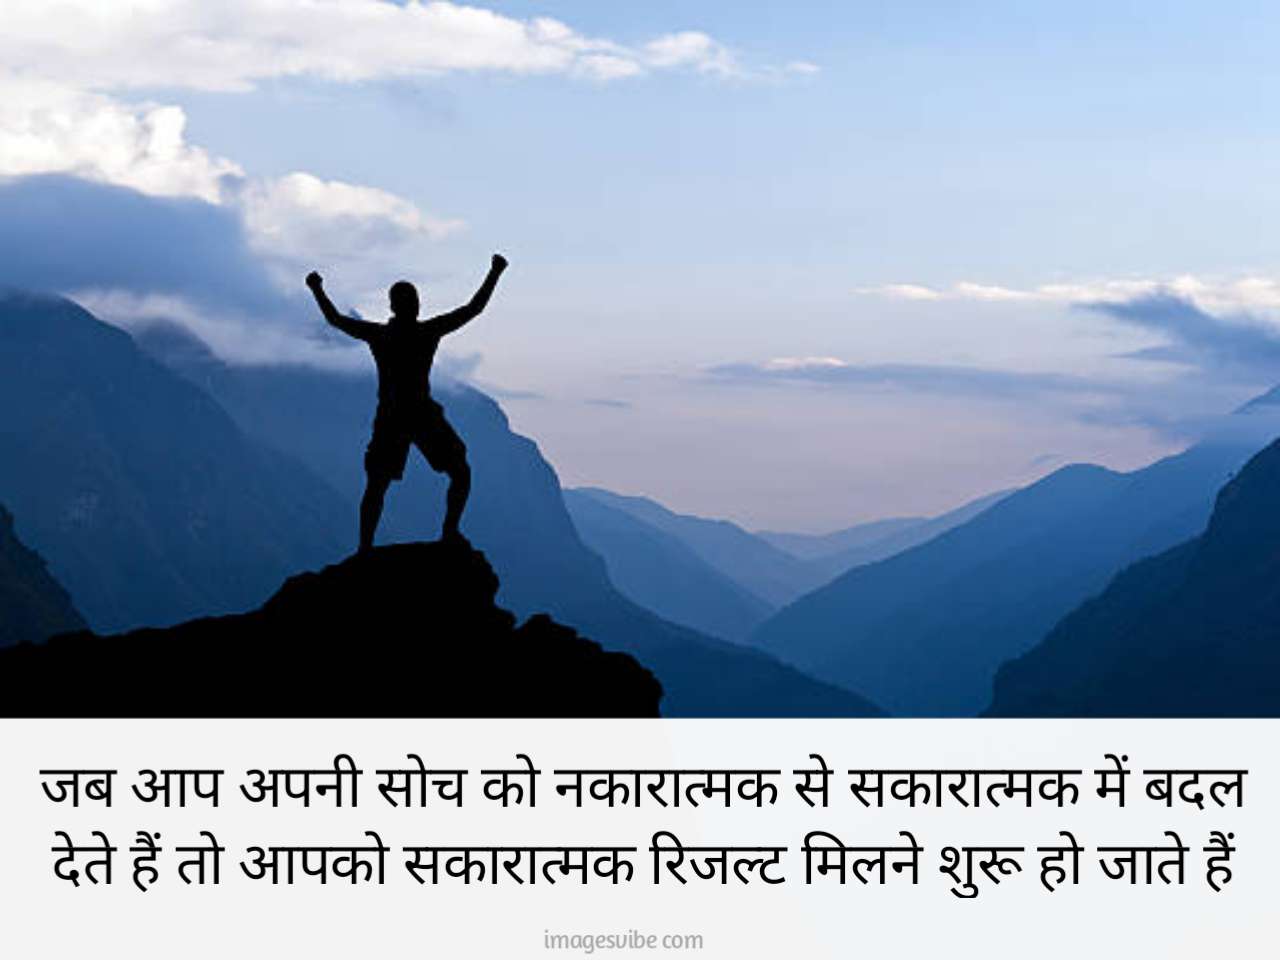 Motivational Hindi Images With Quotes27 